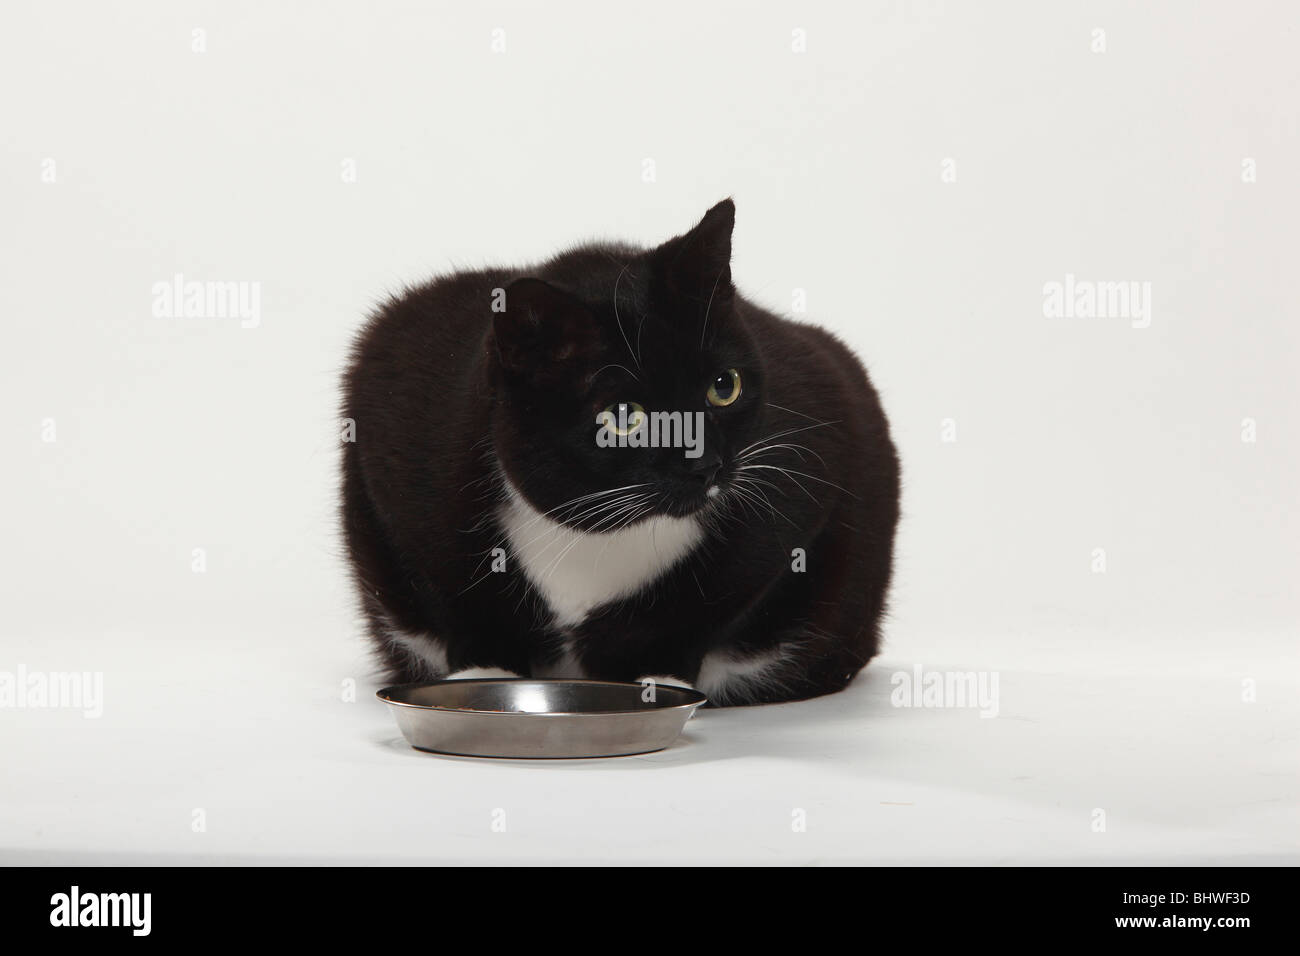 Domestic Cat, too fat / overweight, feeding bowl Stock Photo